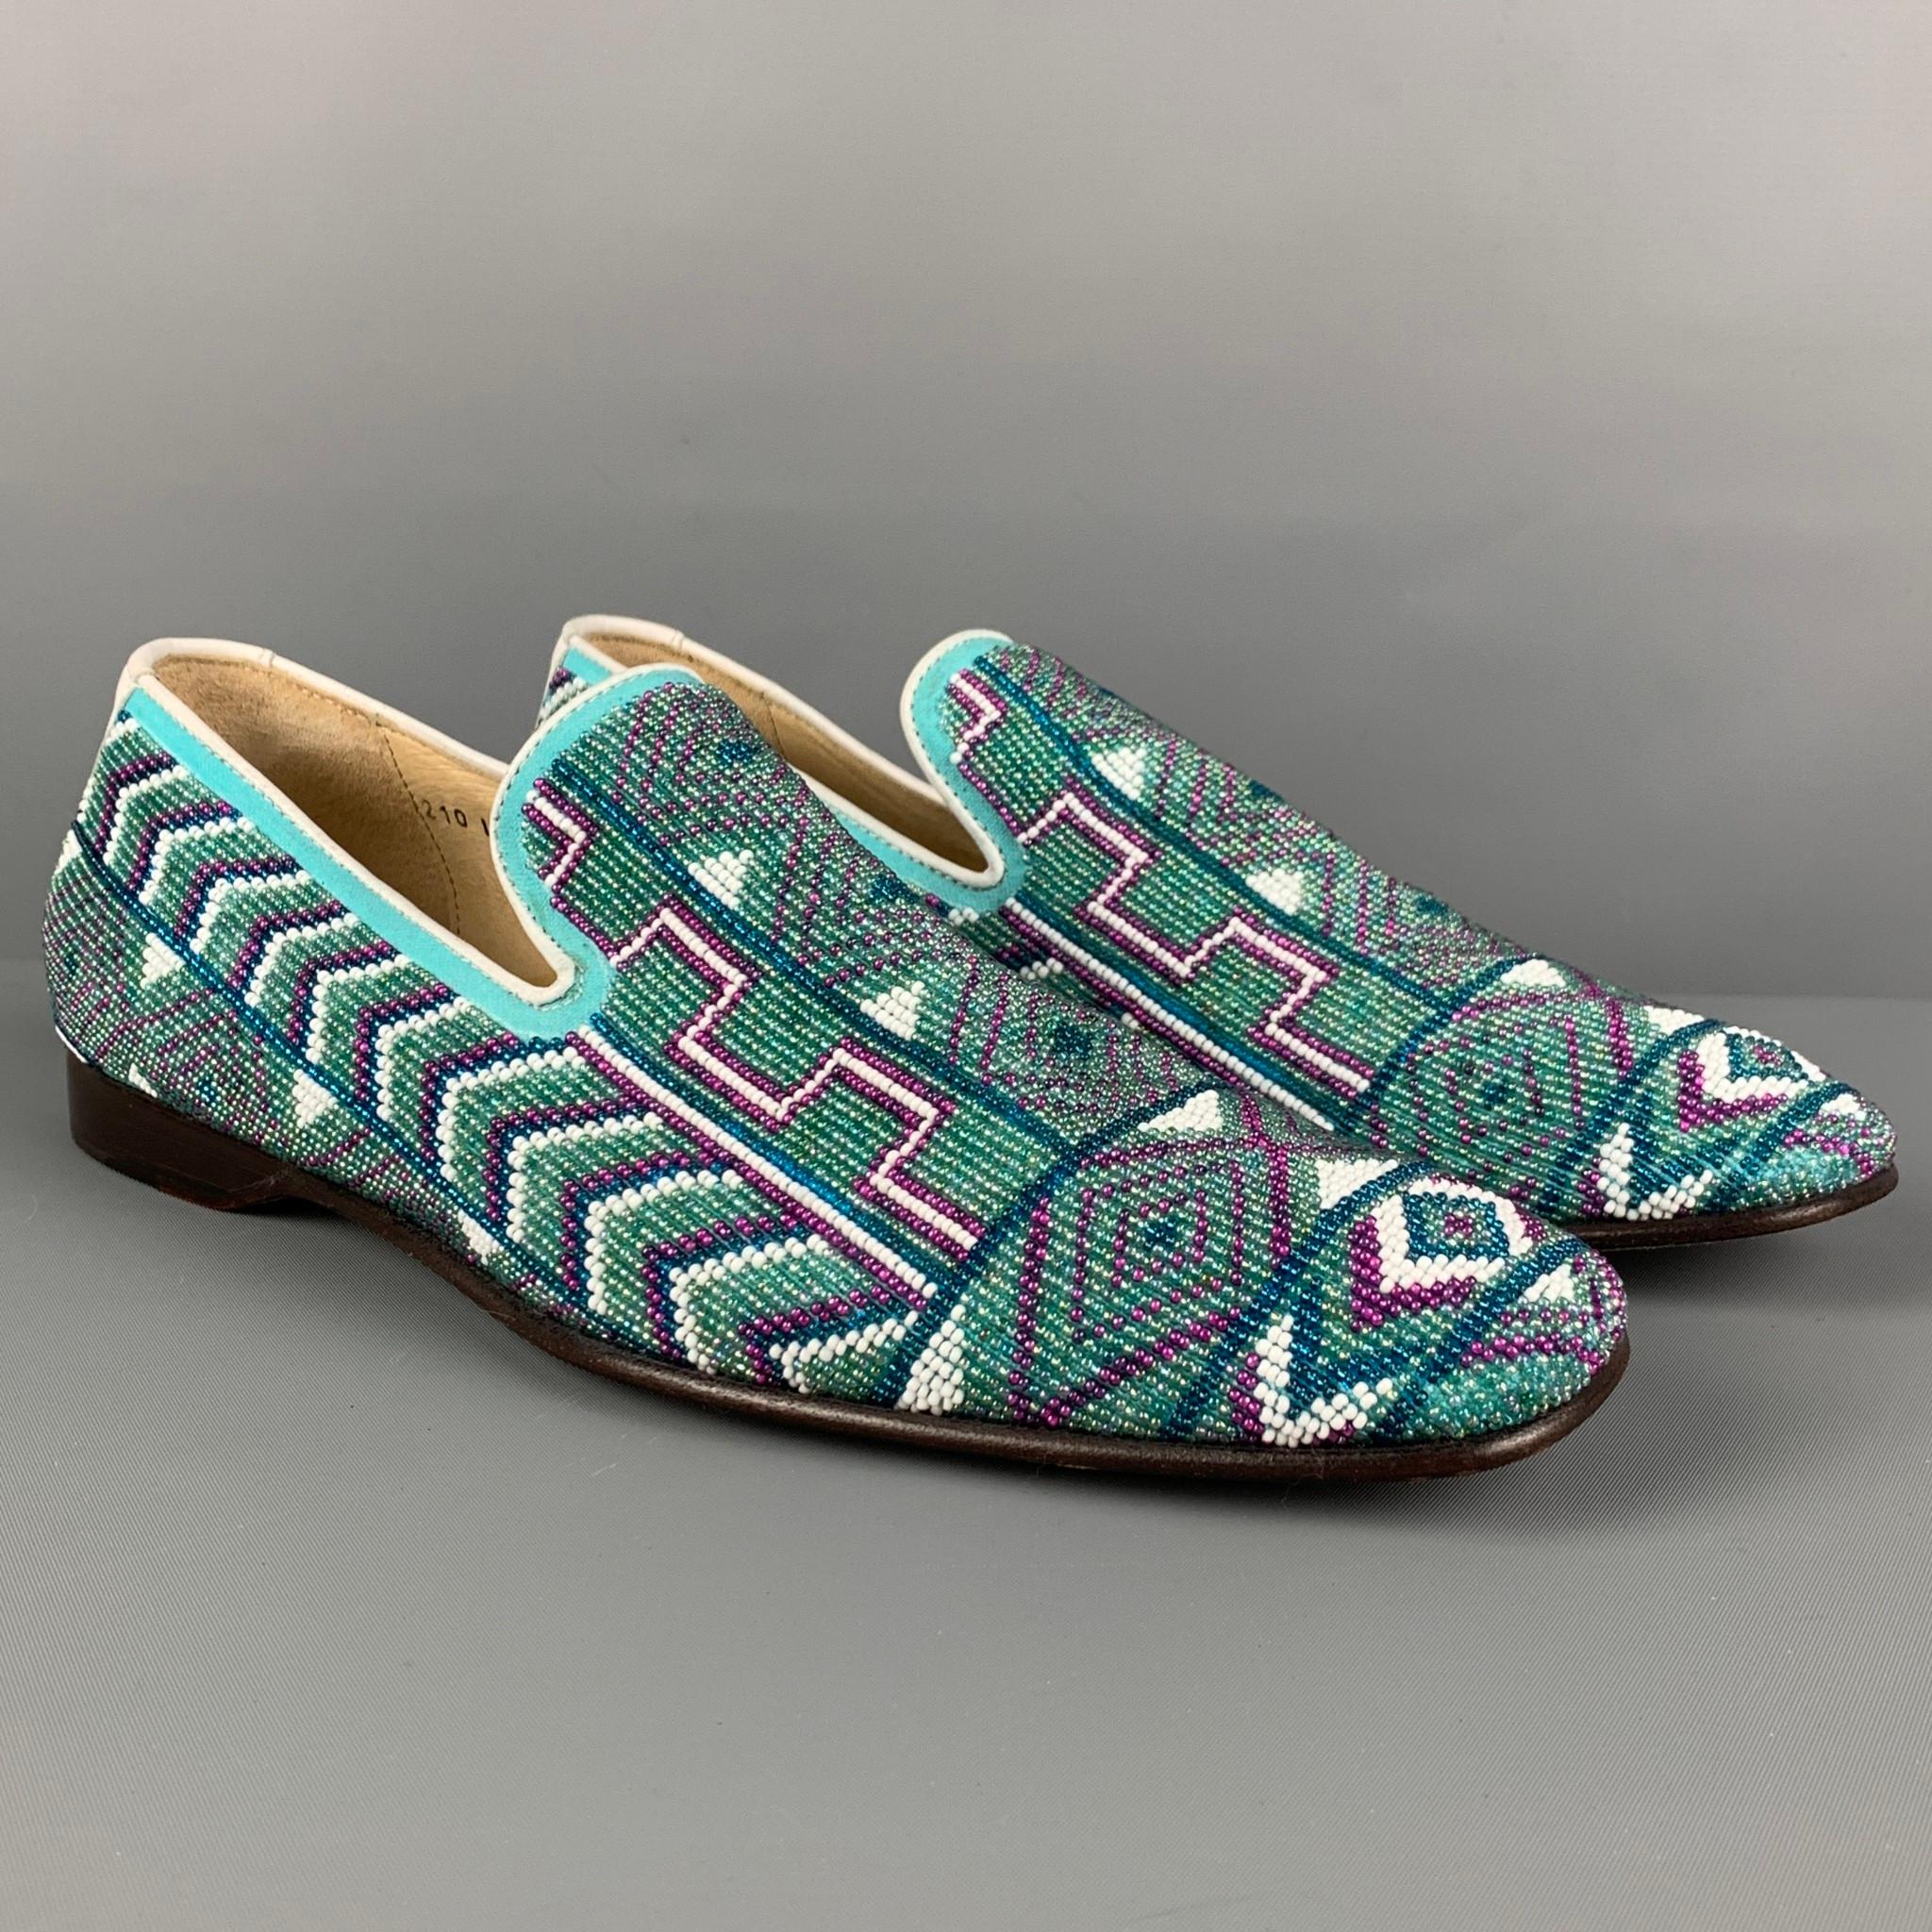 DONALD J PLINER loafers comes in a turquoise & purple beaded leather featuring a slip on style and a square toe. Made in Italy. 

Very Good Pre-Owned Condition.
Marked: 9 M

Outsole: 11.75 in. x 4 in. 